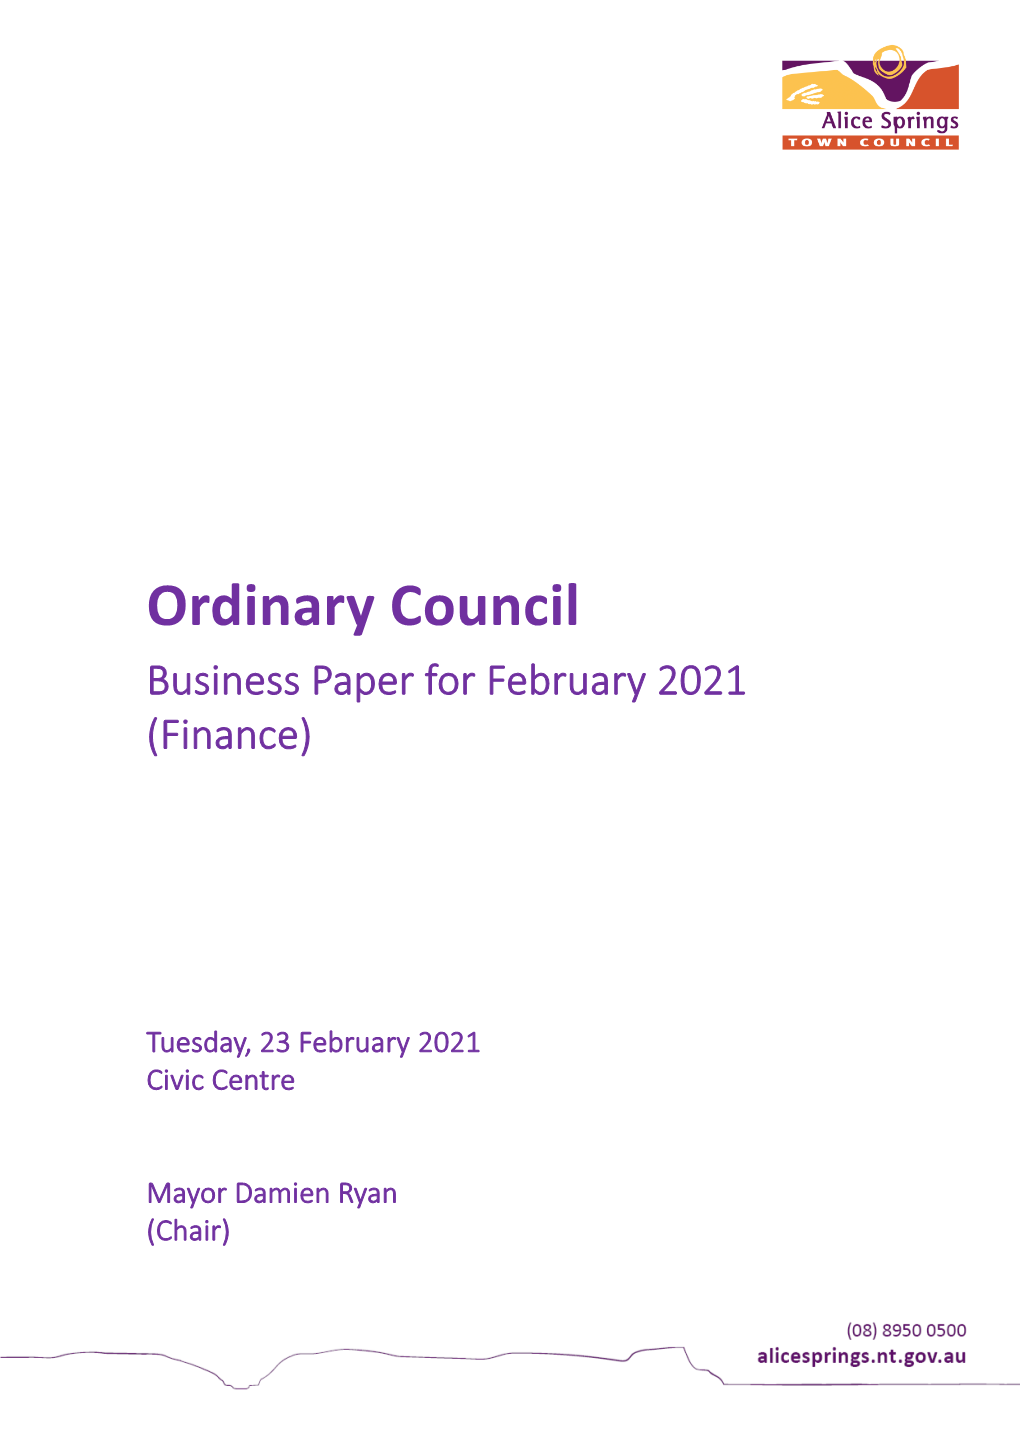 Ordinary Council Business Paper for February 2021 (Finance)